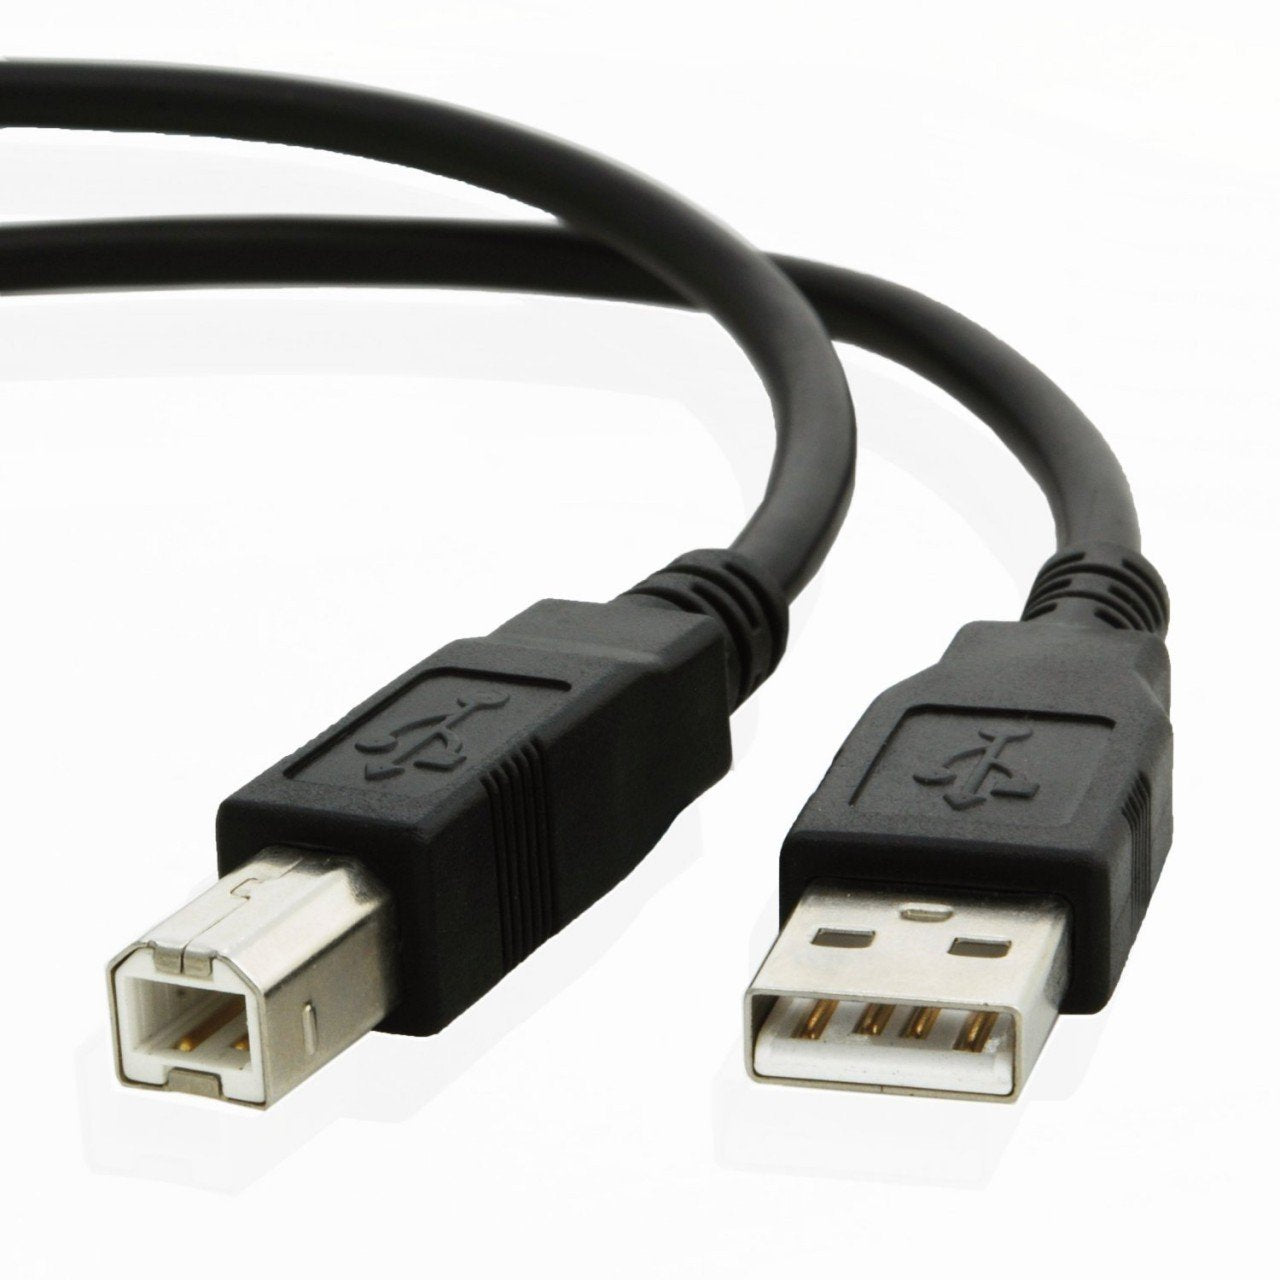 USB cable for Casio DIGITAL PIANO PX-730